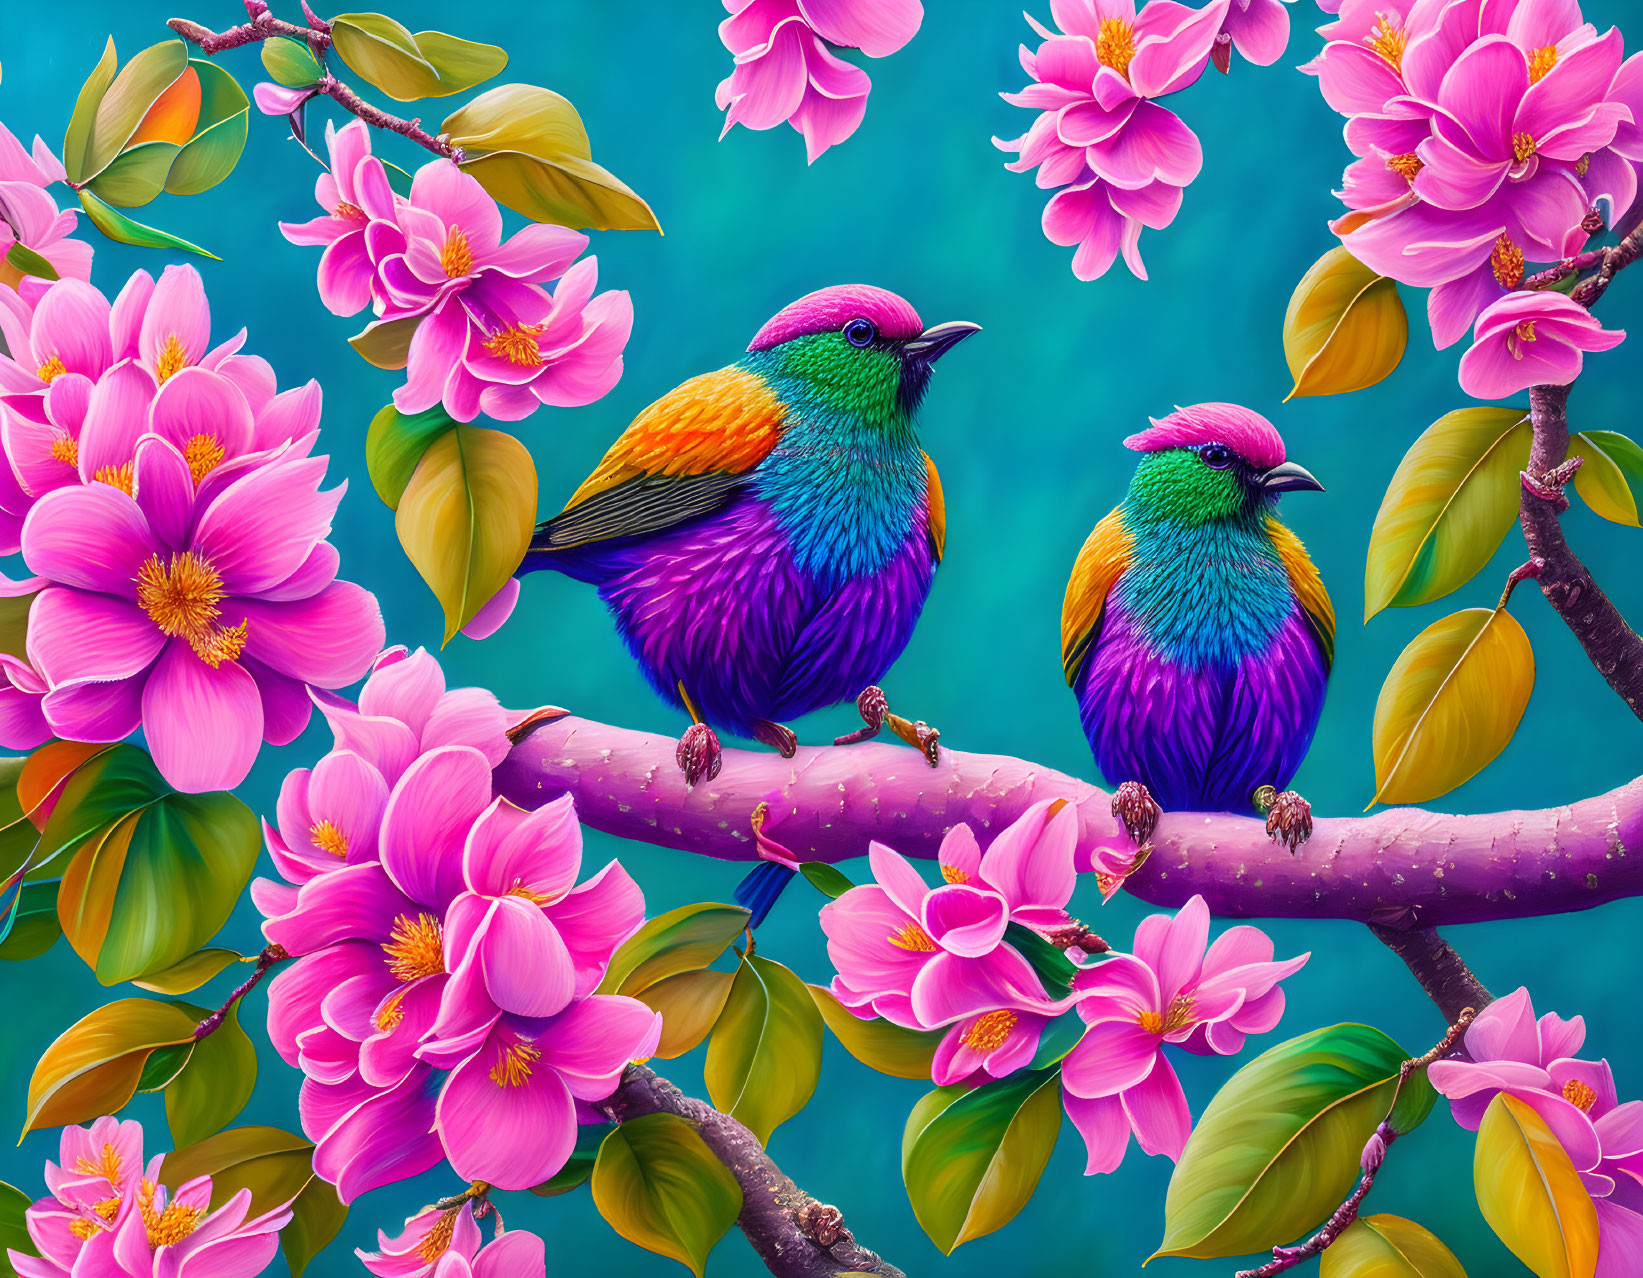 Colorful Birds Perched on Branch with Pink Flowers on Teal Background